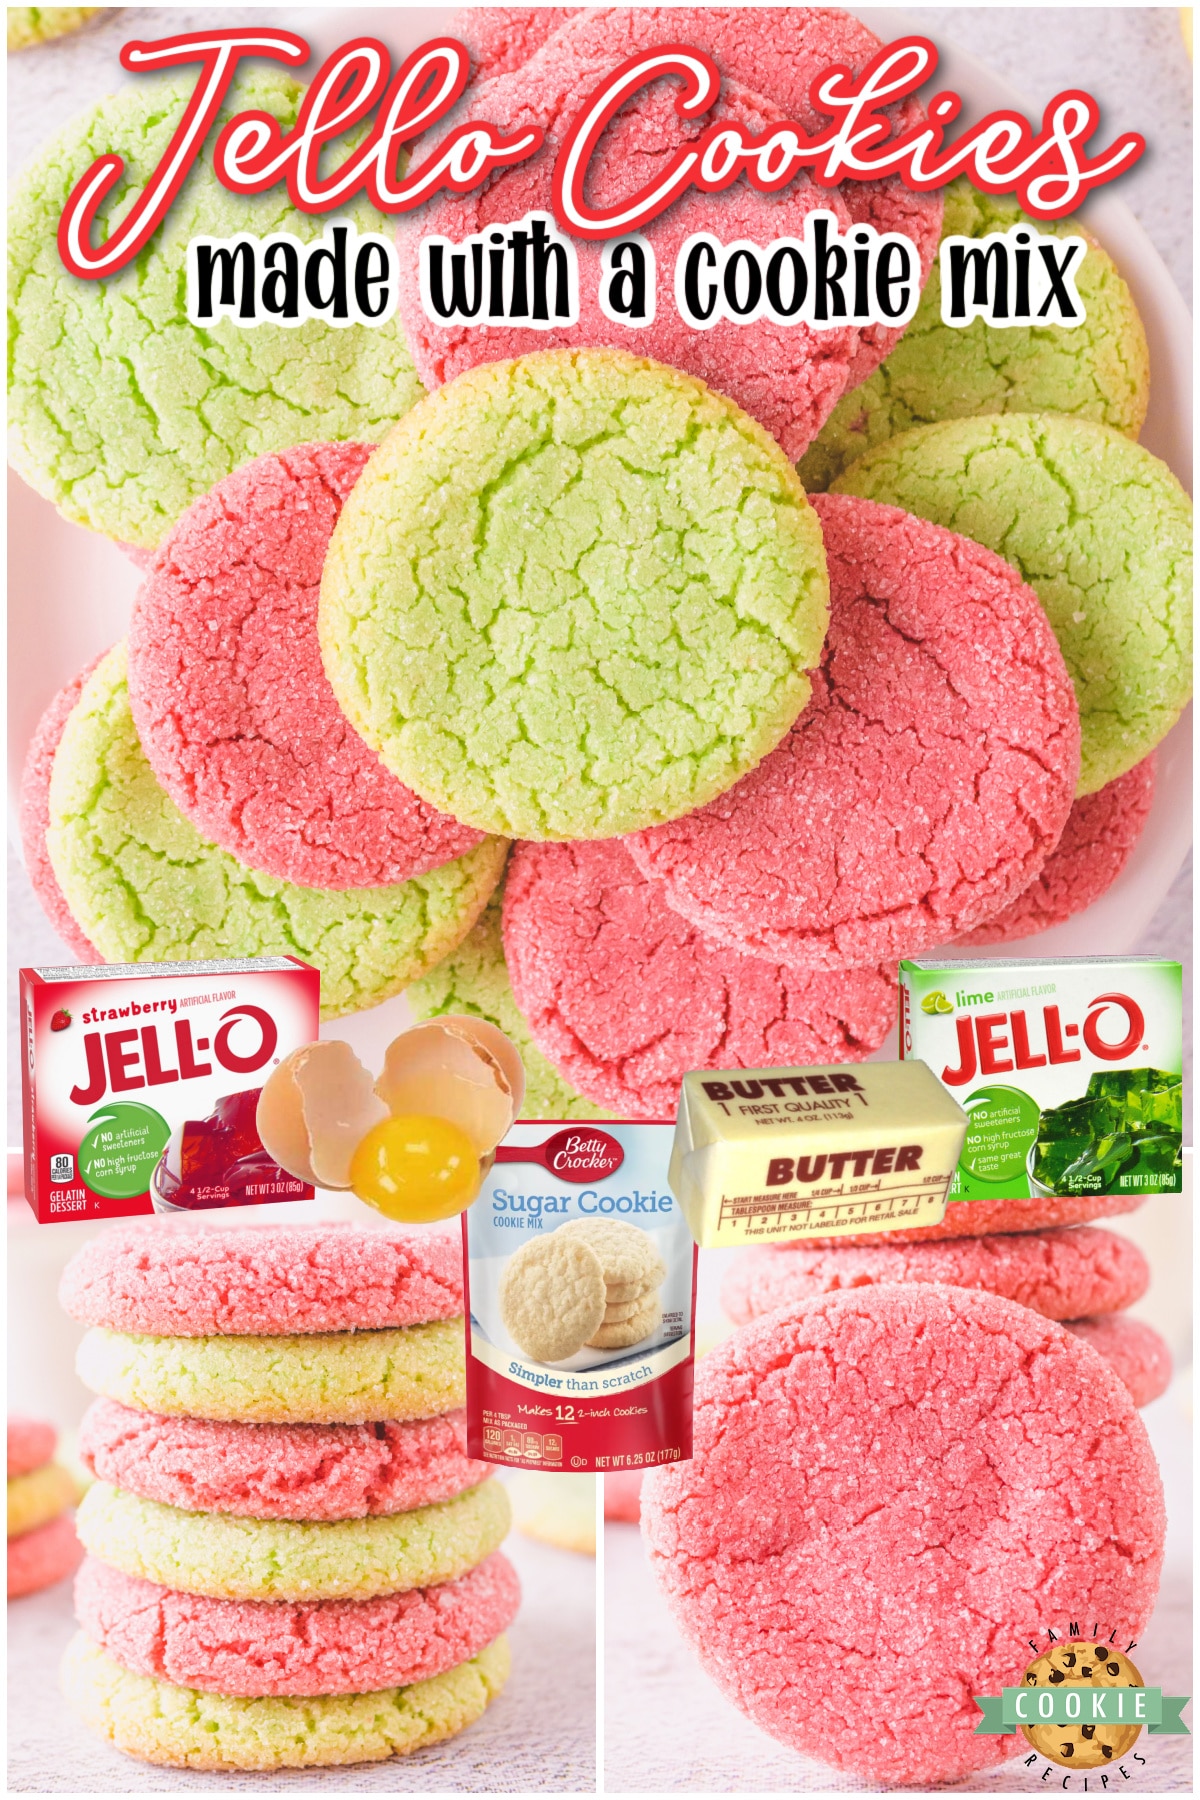 Easy Jello Cookies start with a cookie mix & jello for fun, fruity treats! These Jello sugar cookies come together quickly & taste amazing!